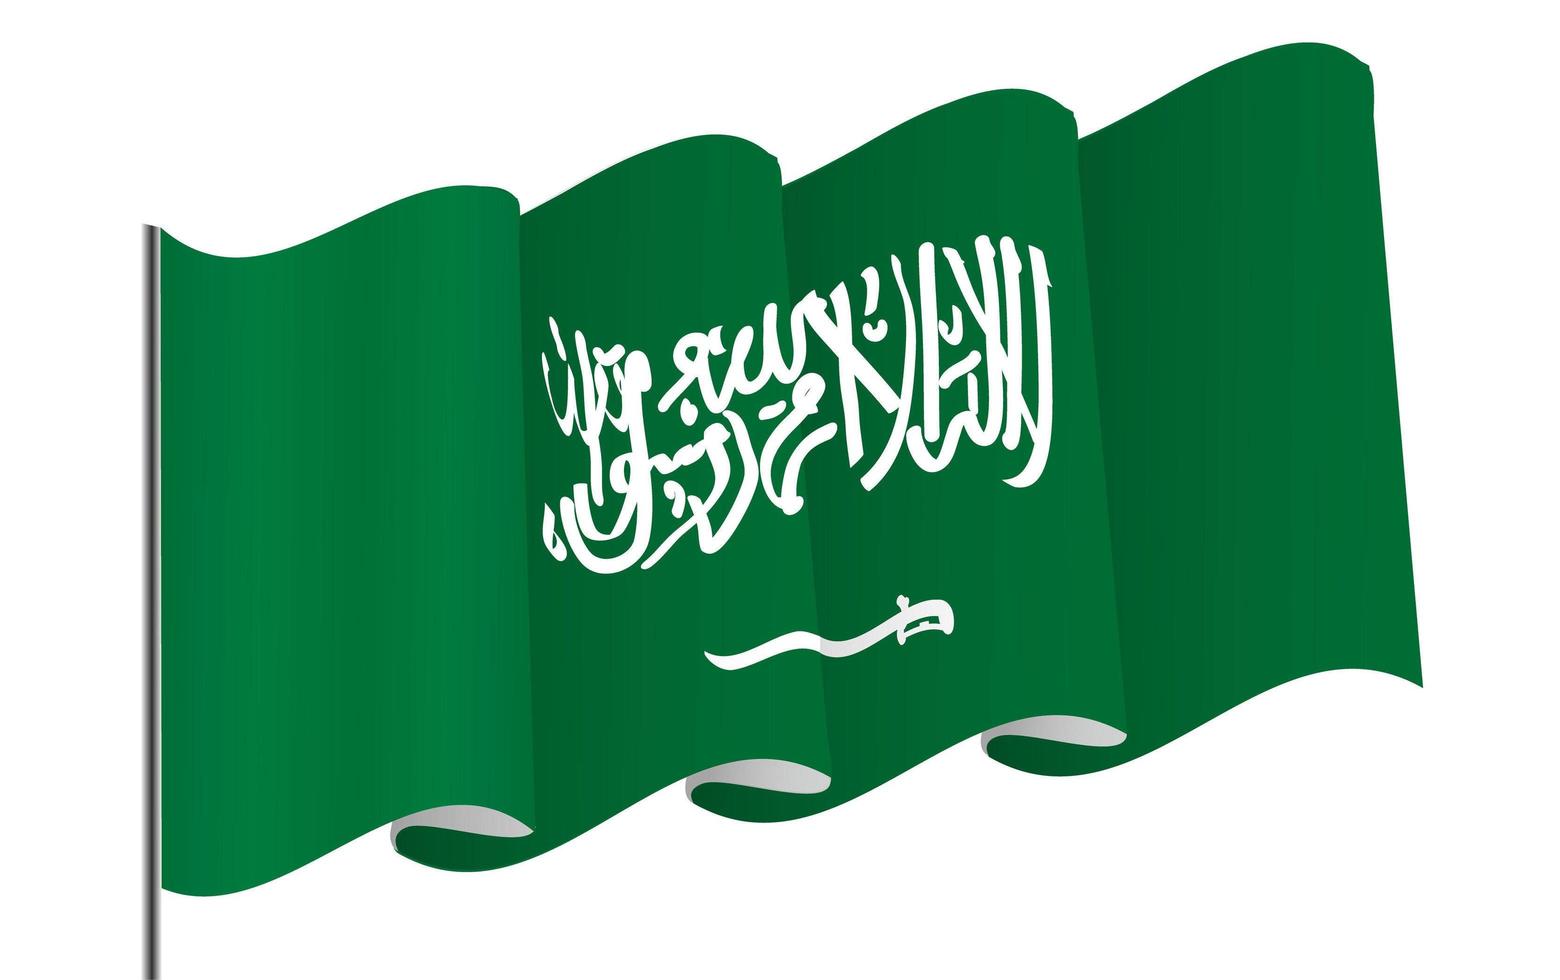 Saudi Arabian national independence day in 23th September. vector